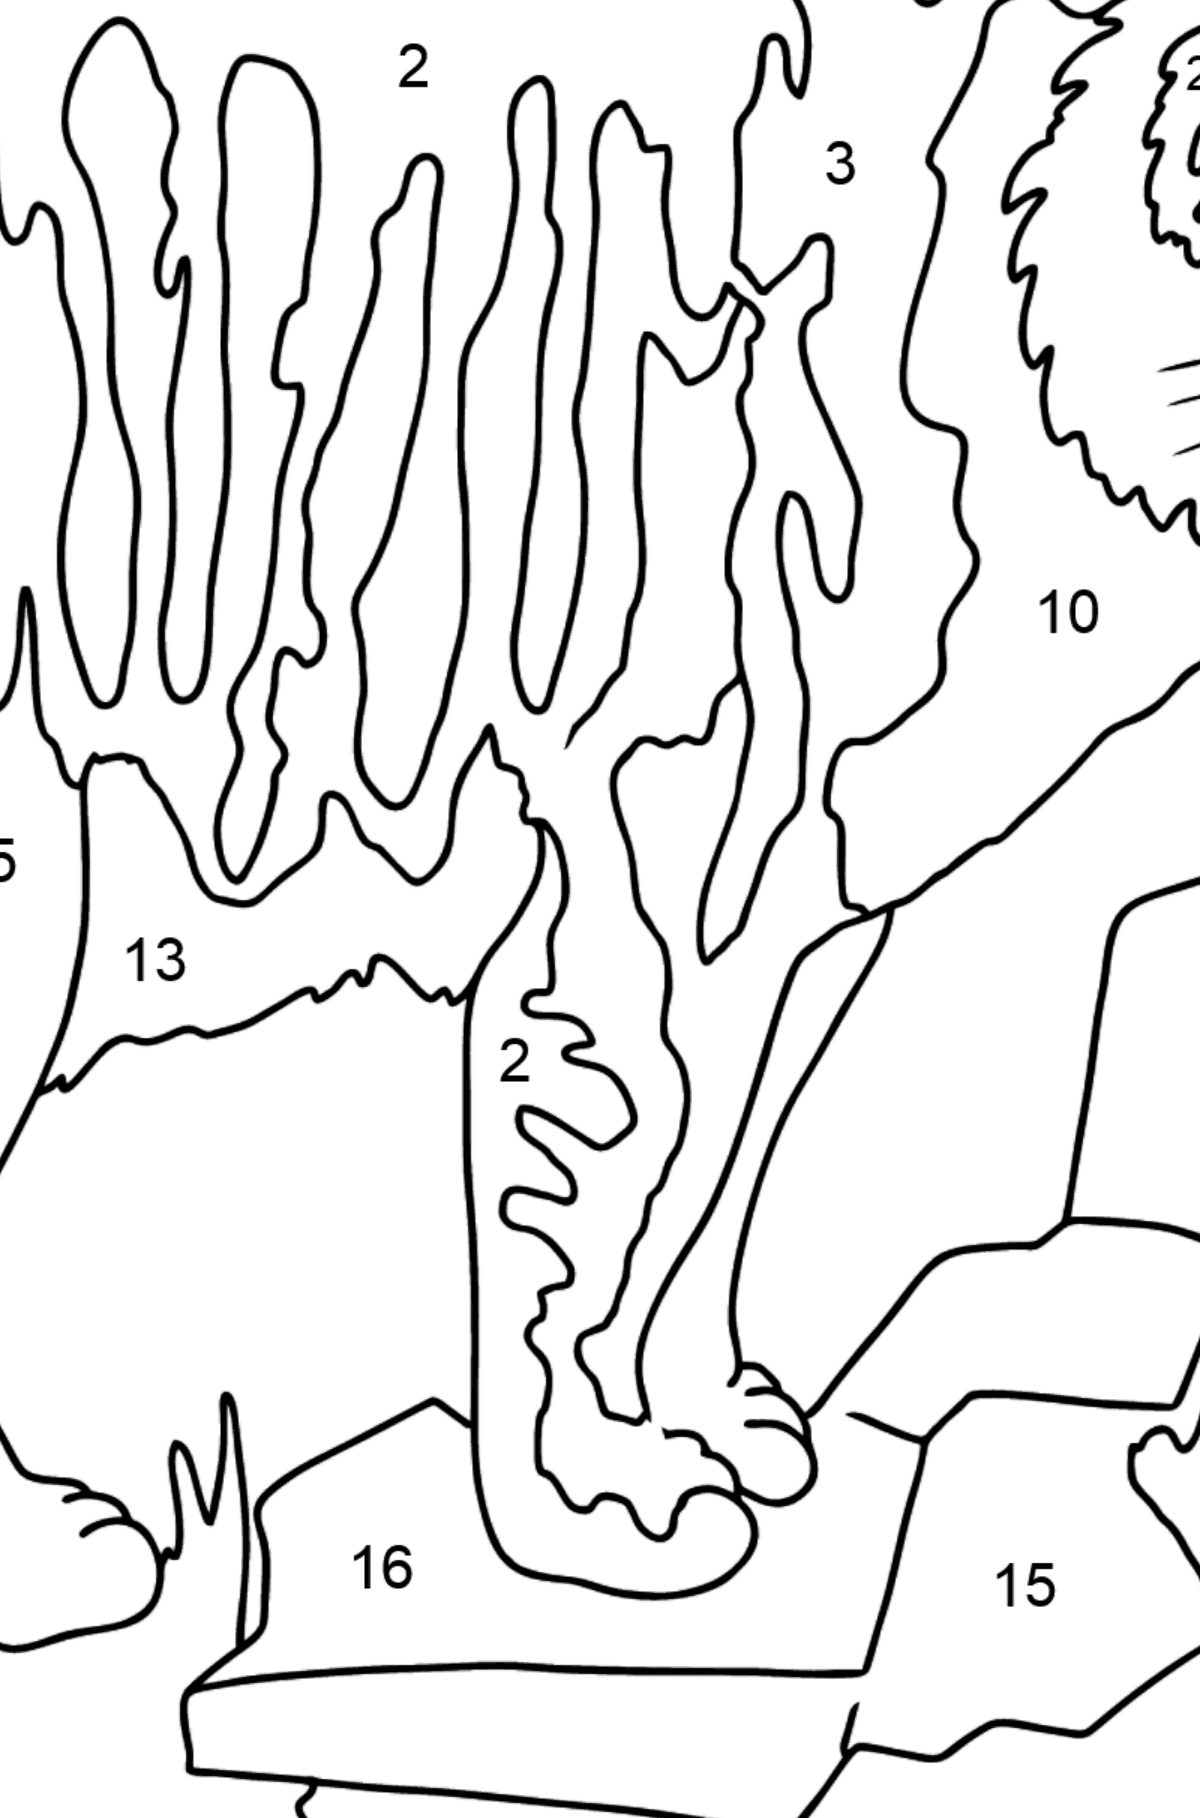 Coloring Page - A Tiger is Looking for Prey - Coloring by Numbers for Kids